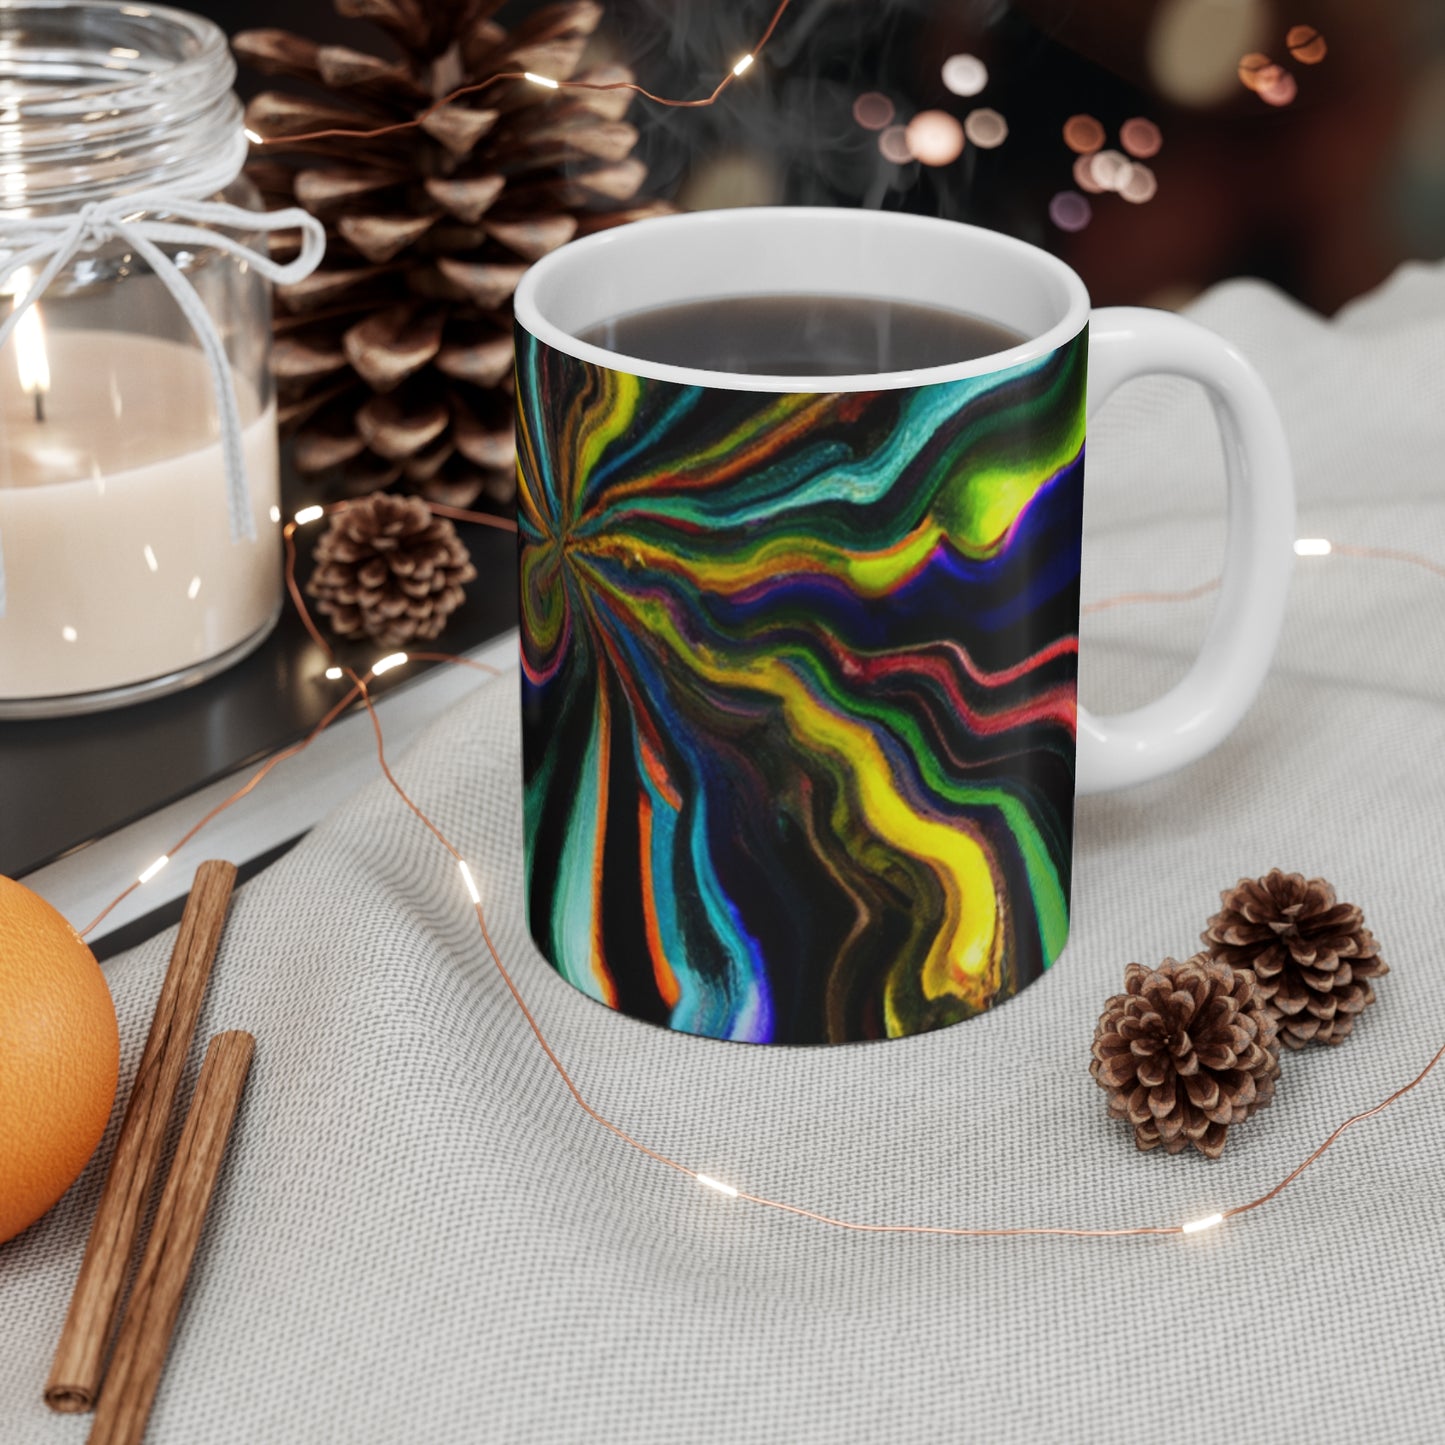 Ferdinand's Finest Friends Coffee - Psychedelic Coffee Cup Mug 11 Ounce